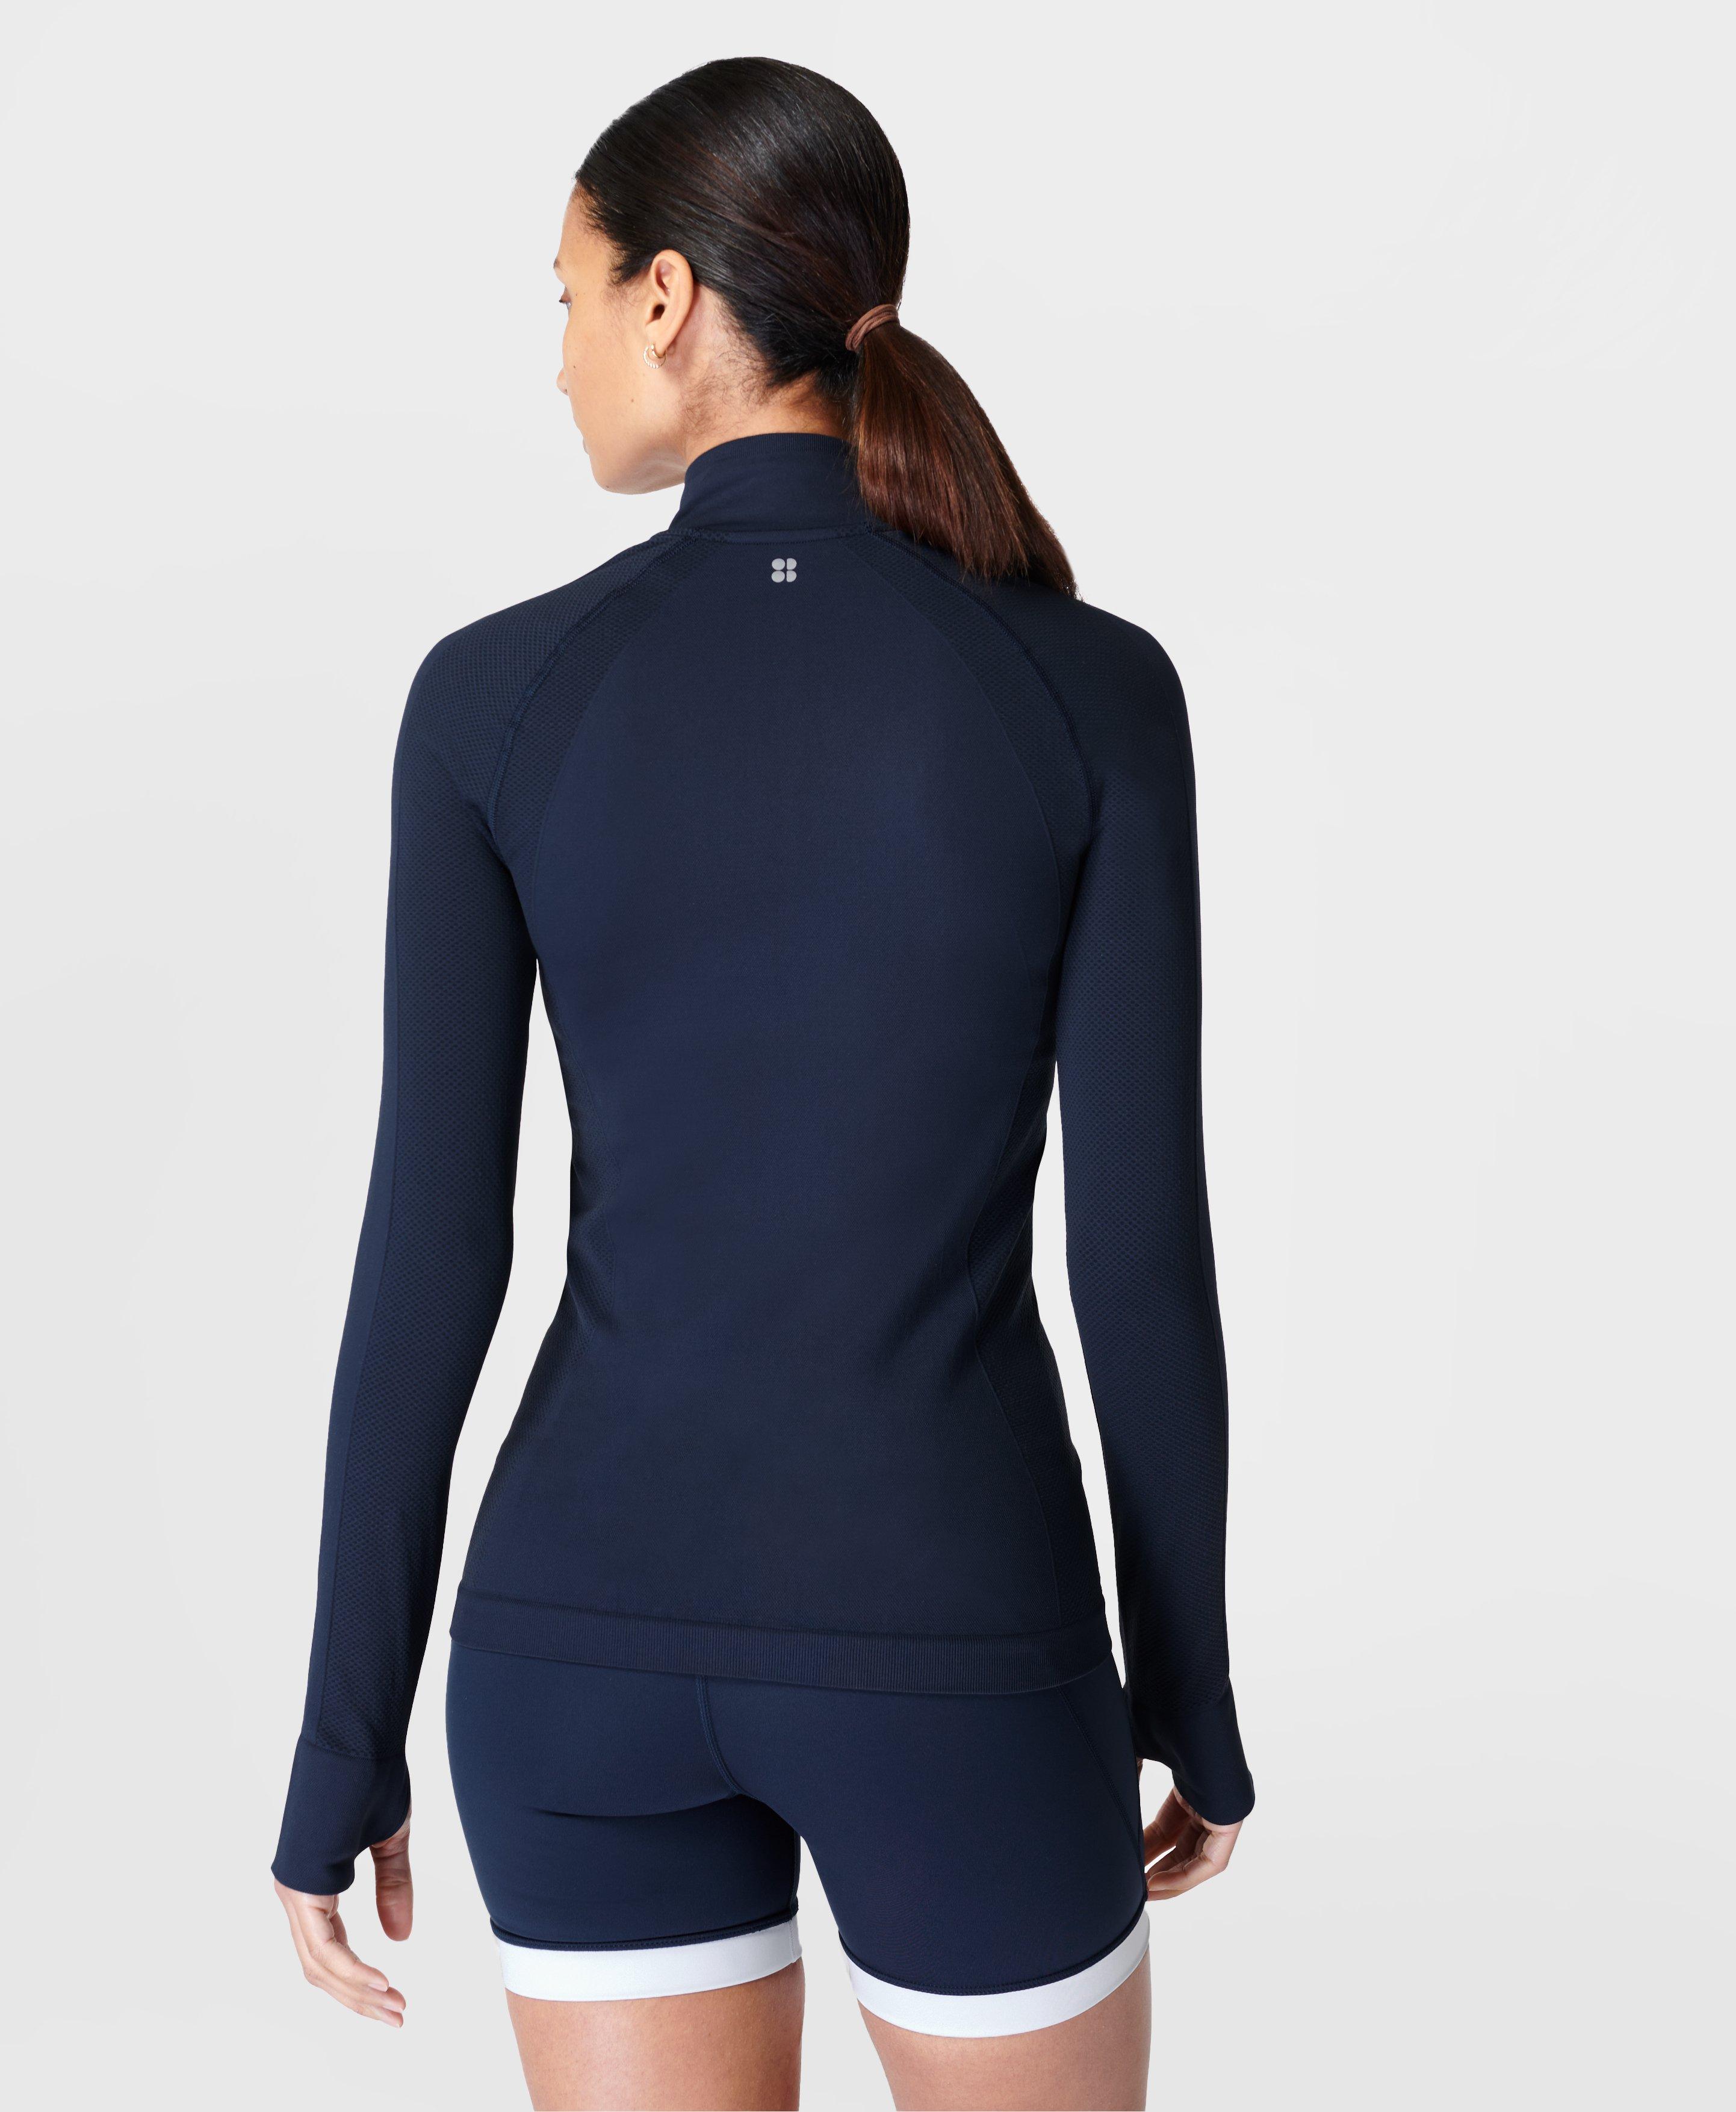 Athlete Doubleweight Seamless Workout Zip Up - Navy Blue